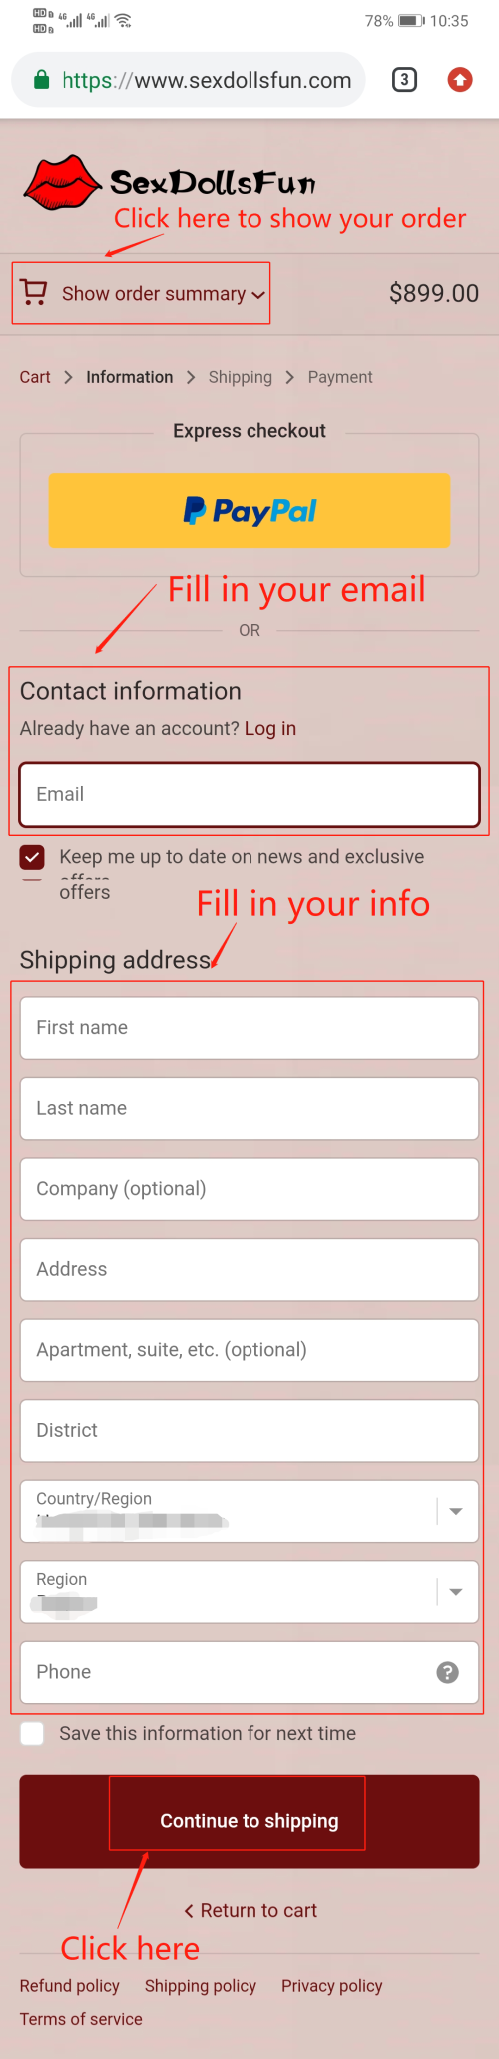 Enter your email address and shipping address